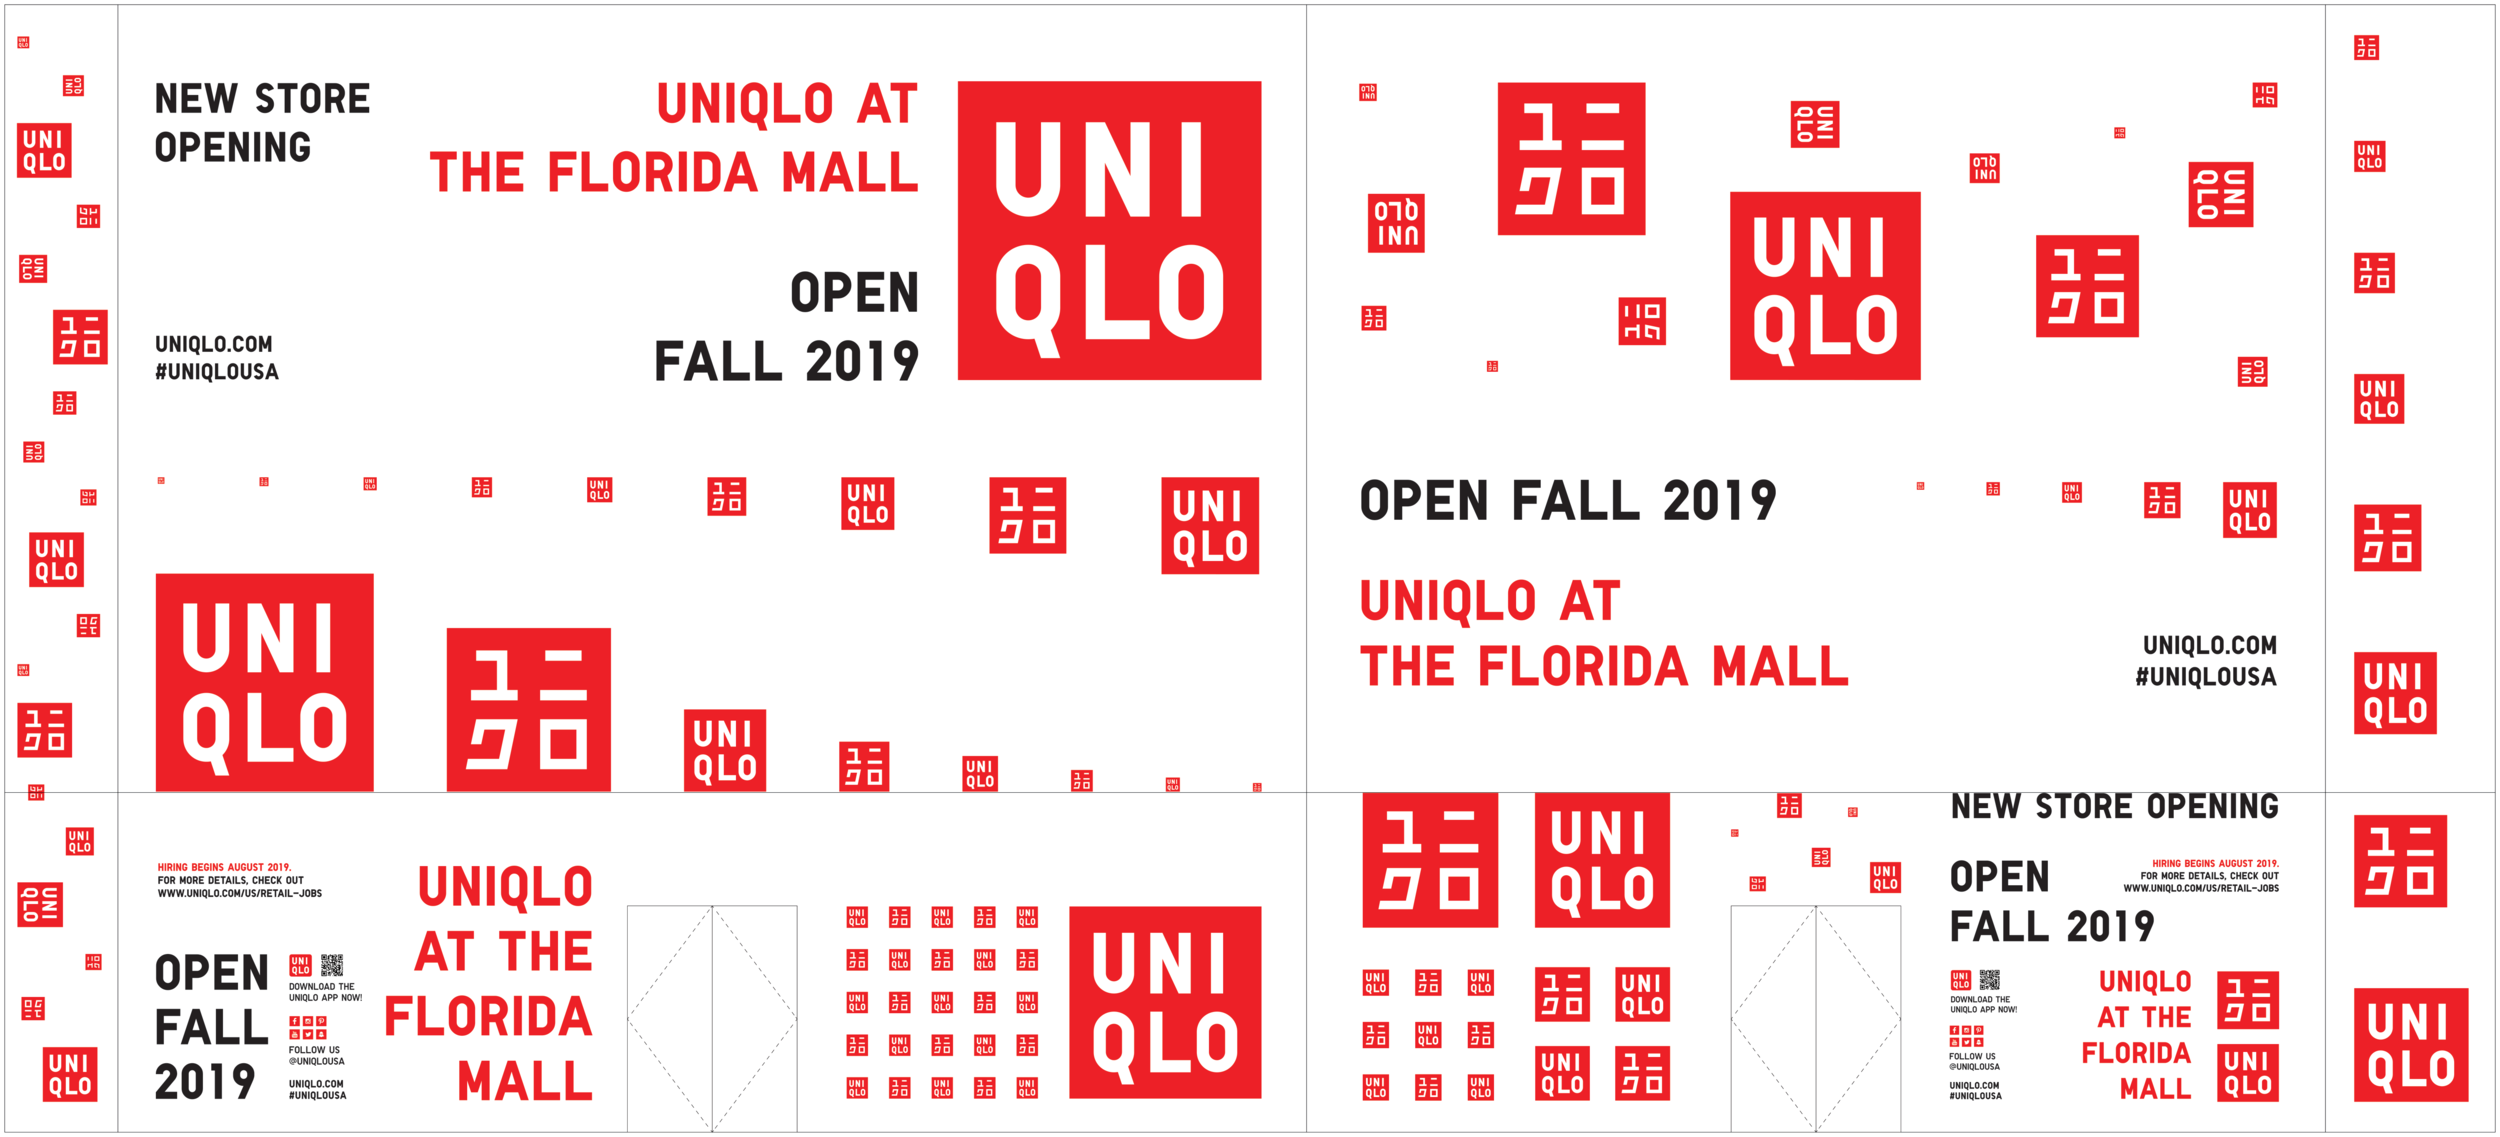 Redesign Logo UNIQLO UNOFFICIAL by Septian Fajar Setiawan on Dribbble